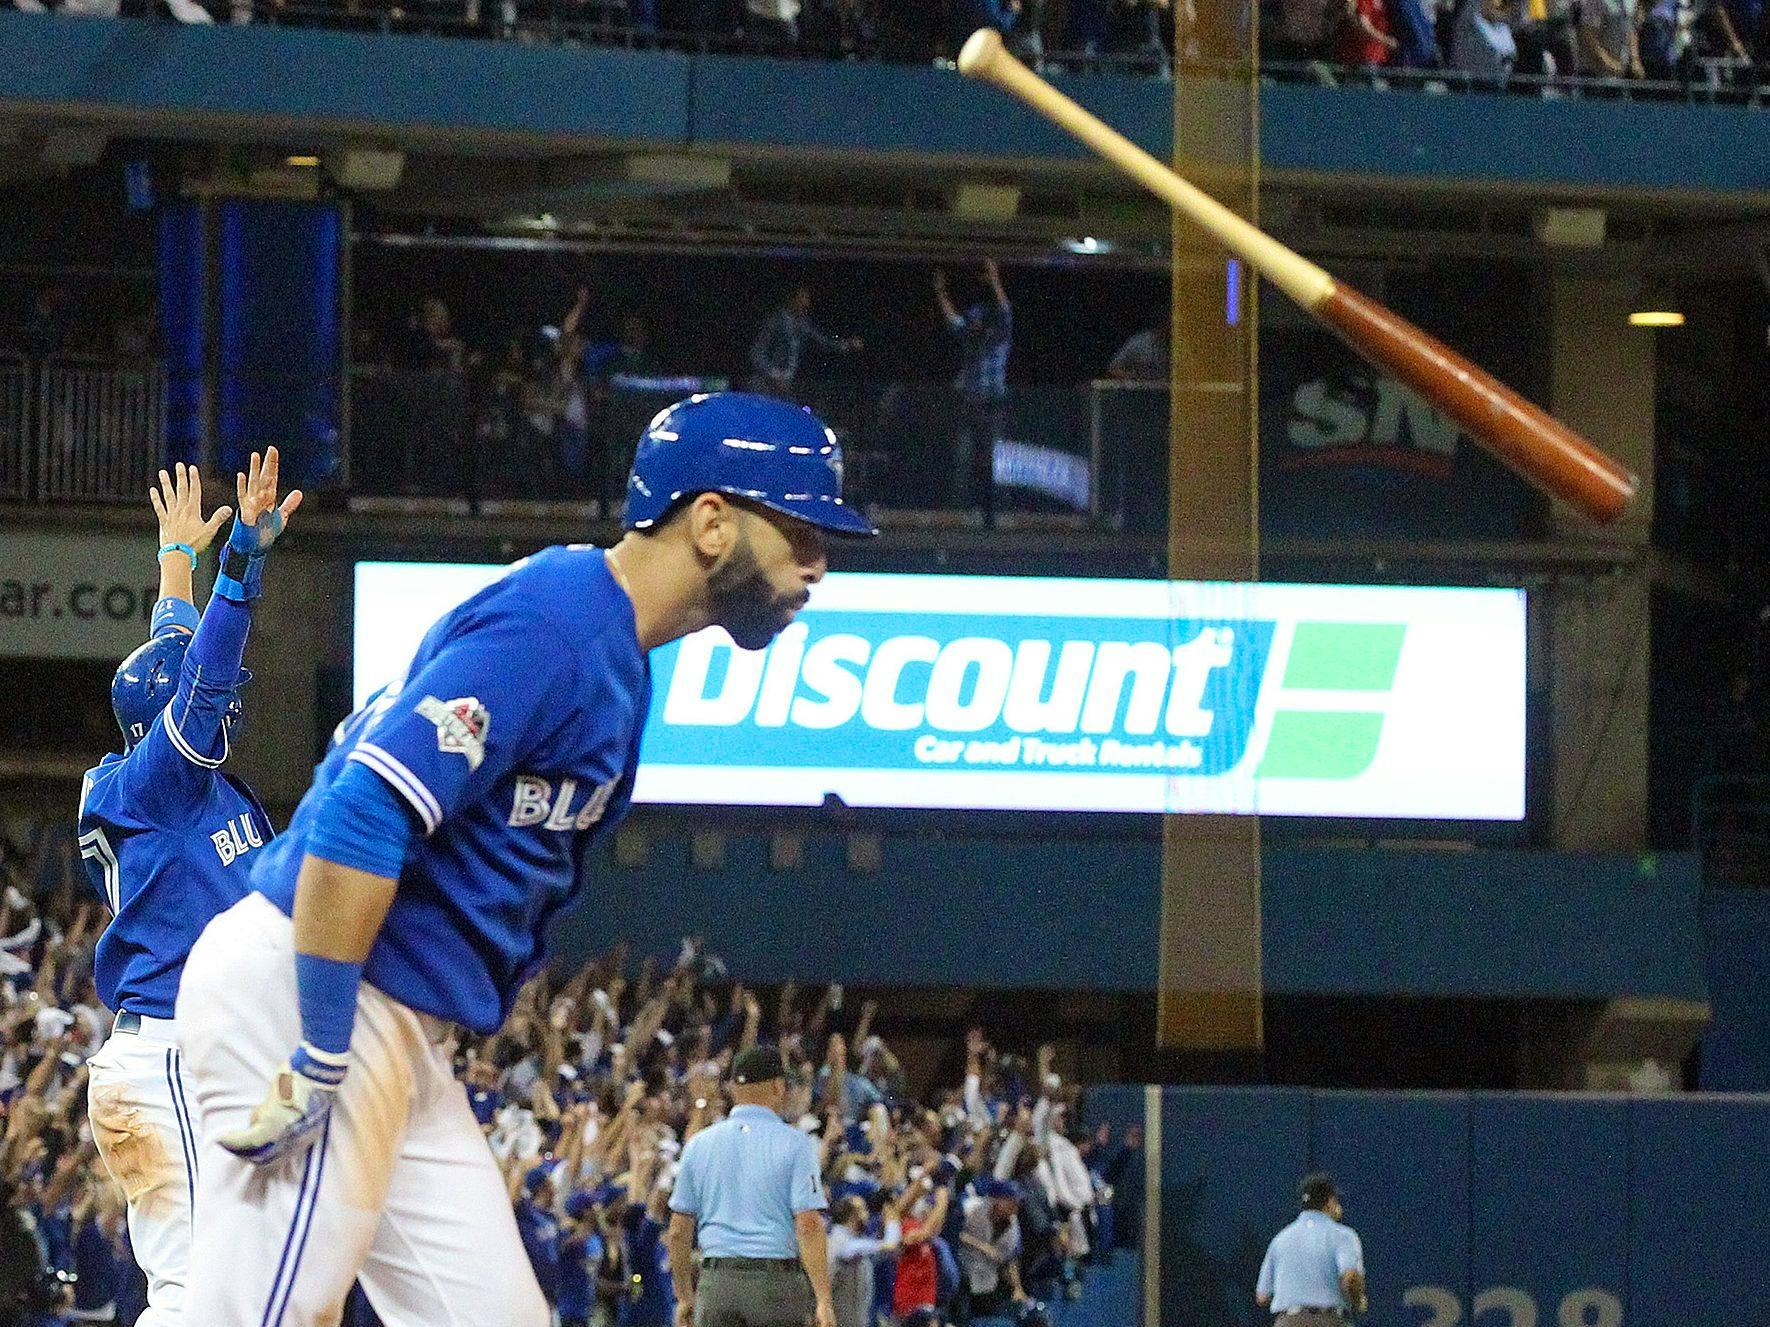 Former Blue Jays slugger Jose Bautista added to Level of Excellence